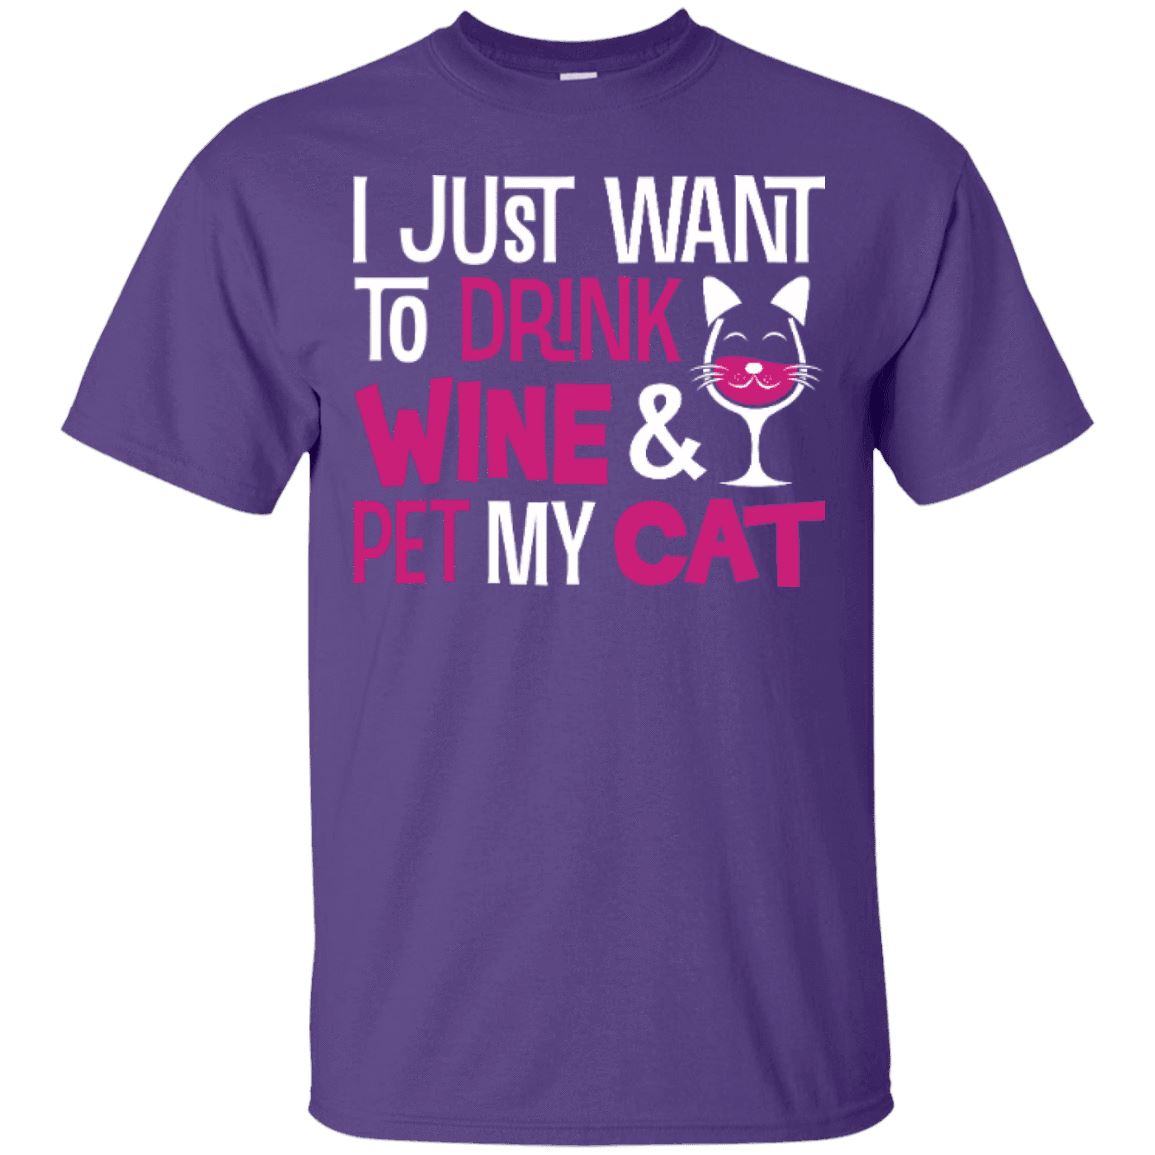 Cat Tee - I Just Want To Drink Wine & Pet My Cat - CatsForLife